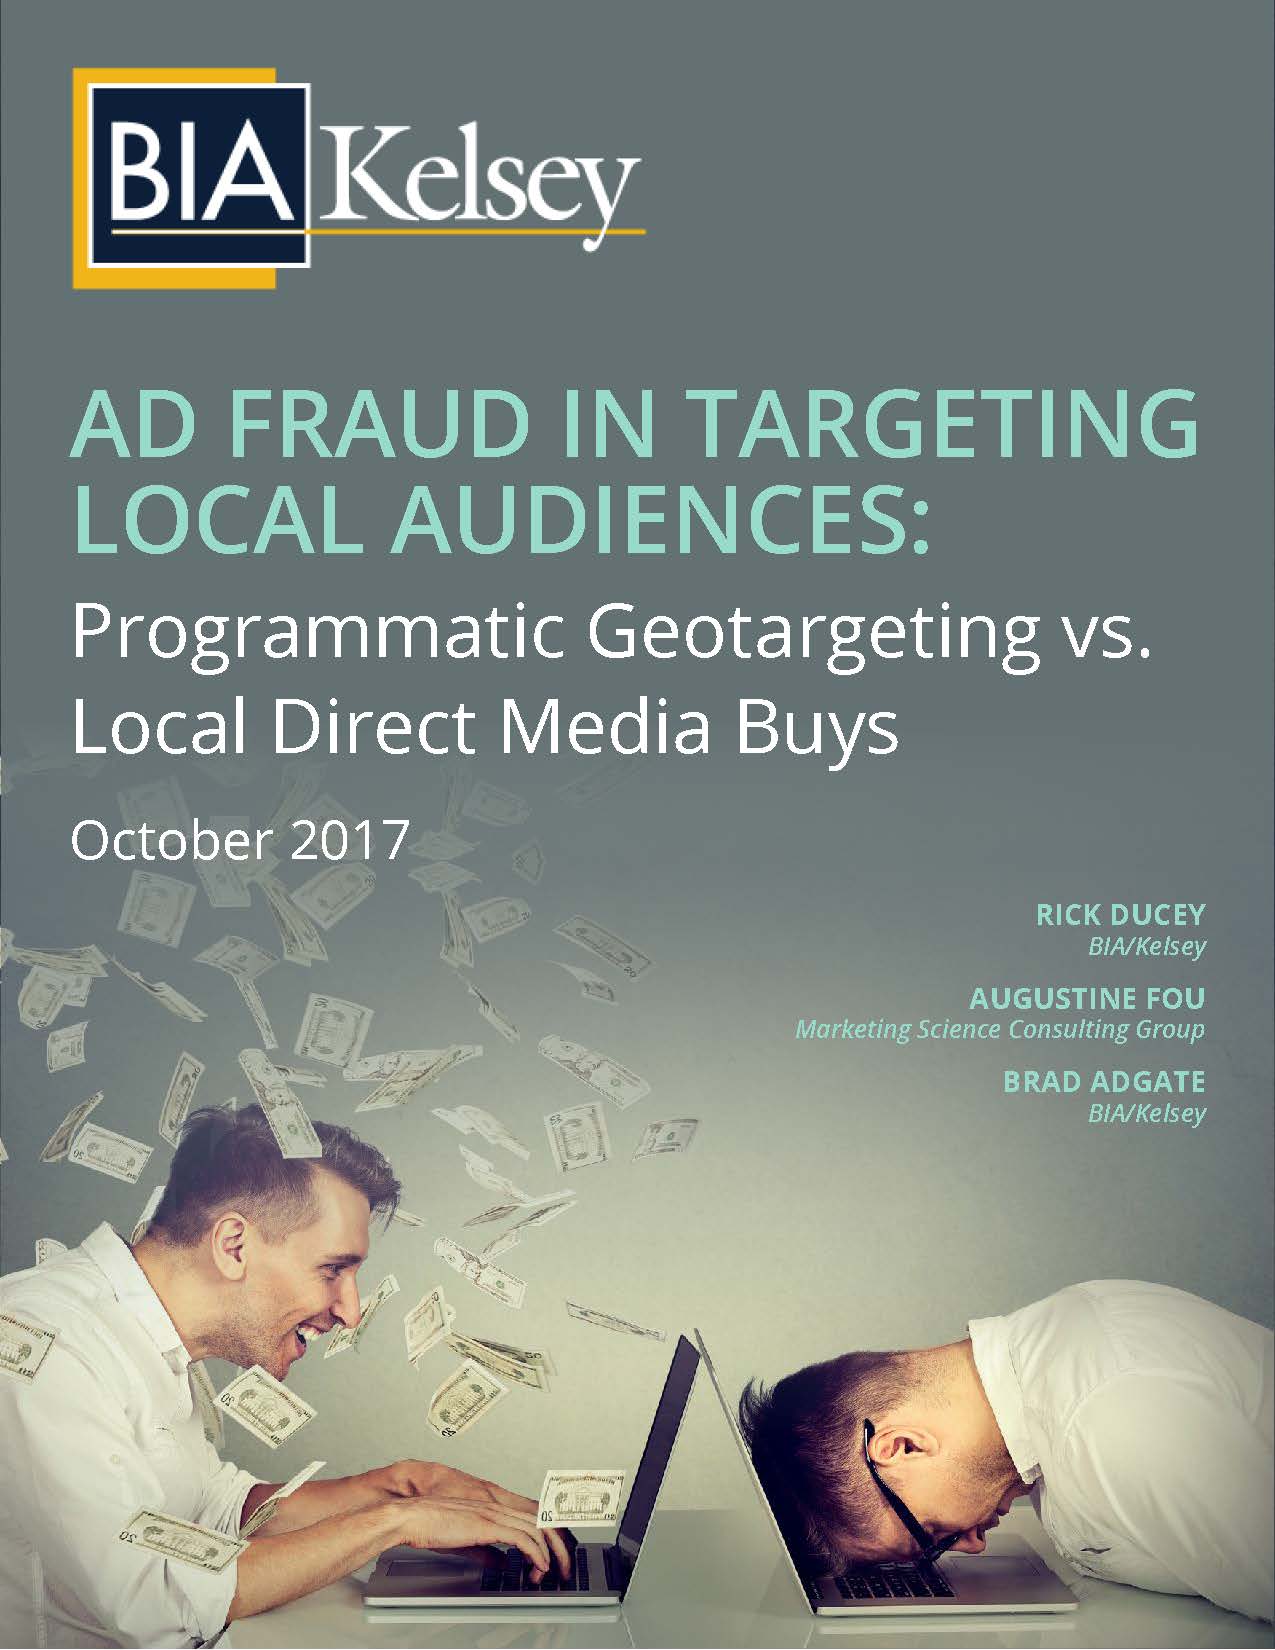 Ad Fraud Risks In Targeting Local Audiences